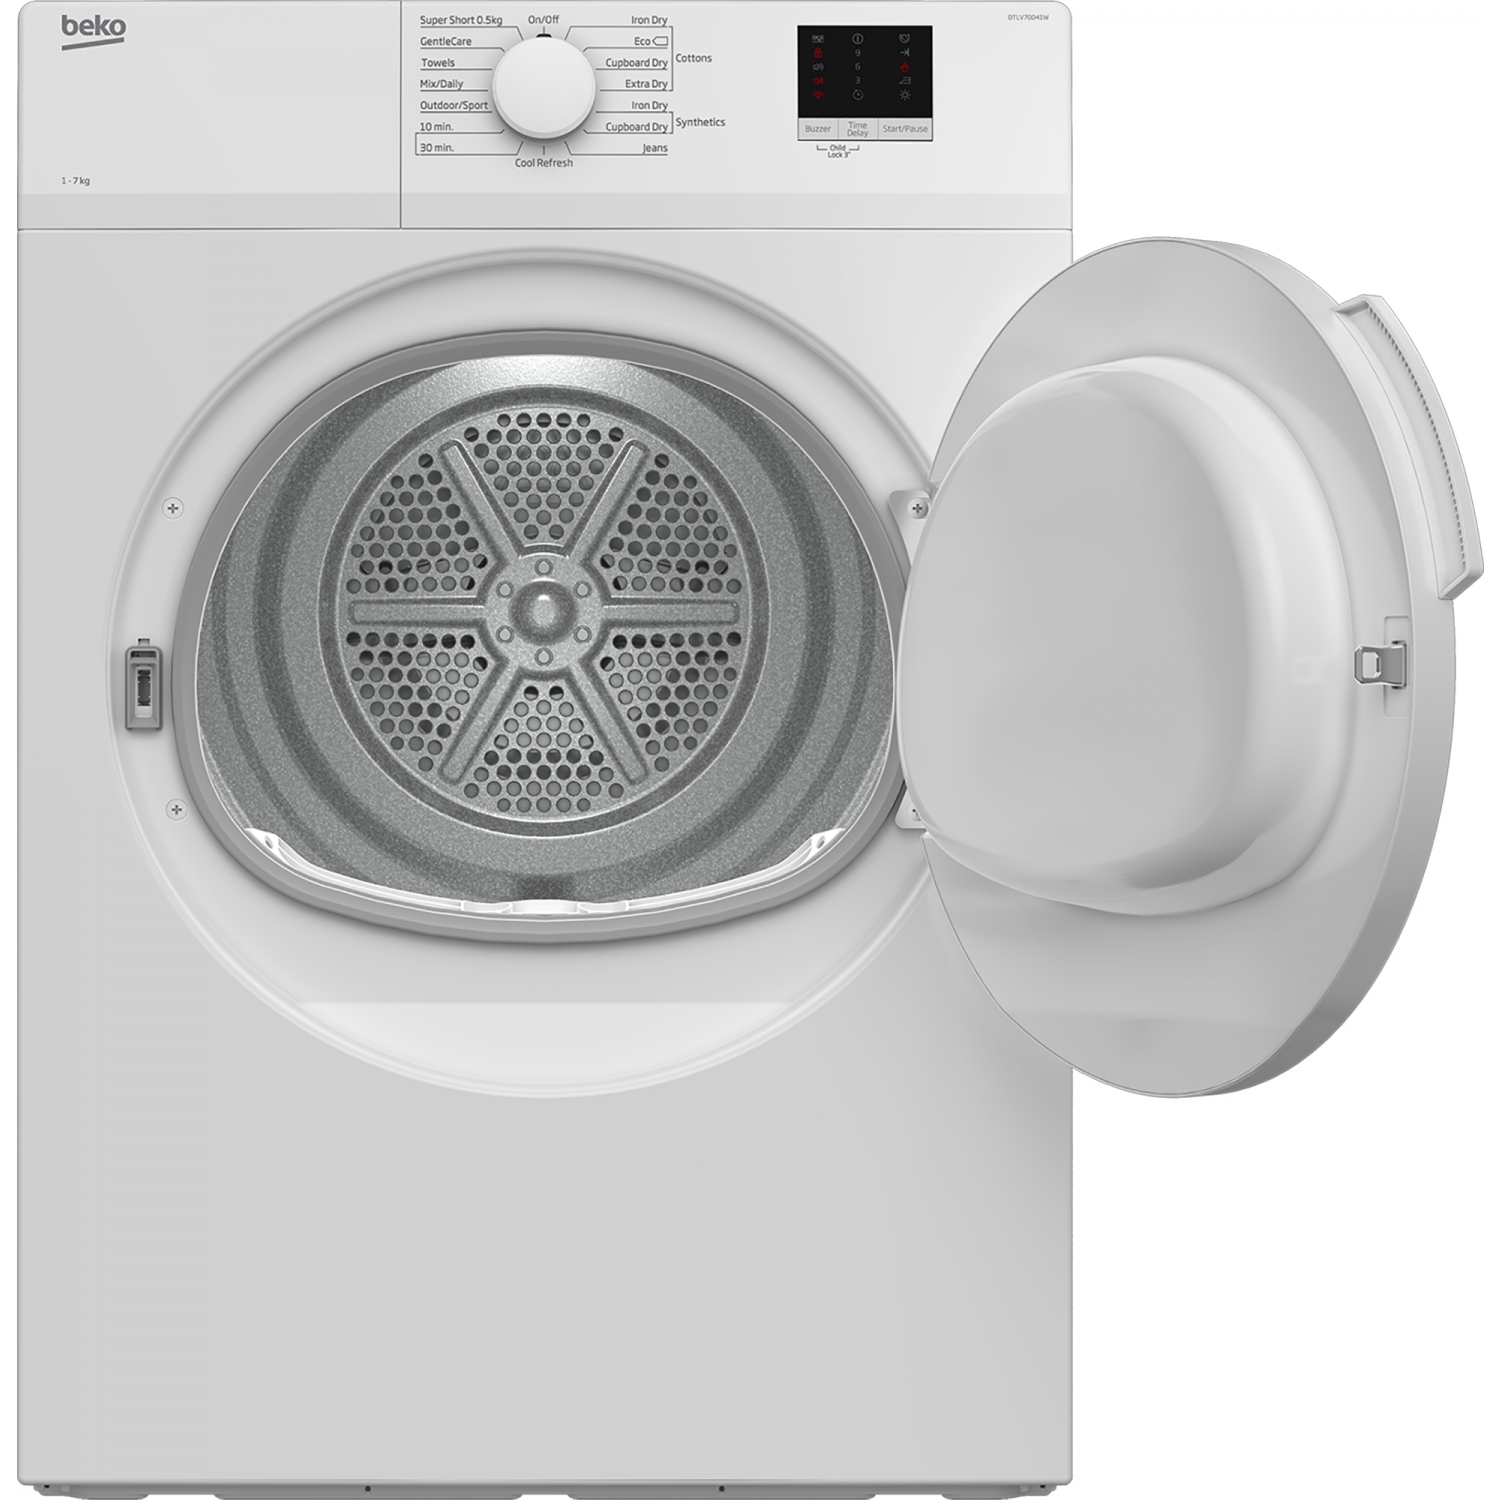 Beko DTGV7000W 7Kg Vented Tumble Dryer - White - C Rated - 1